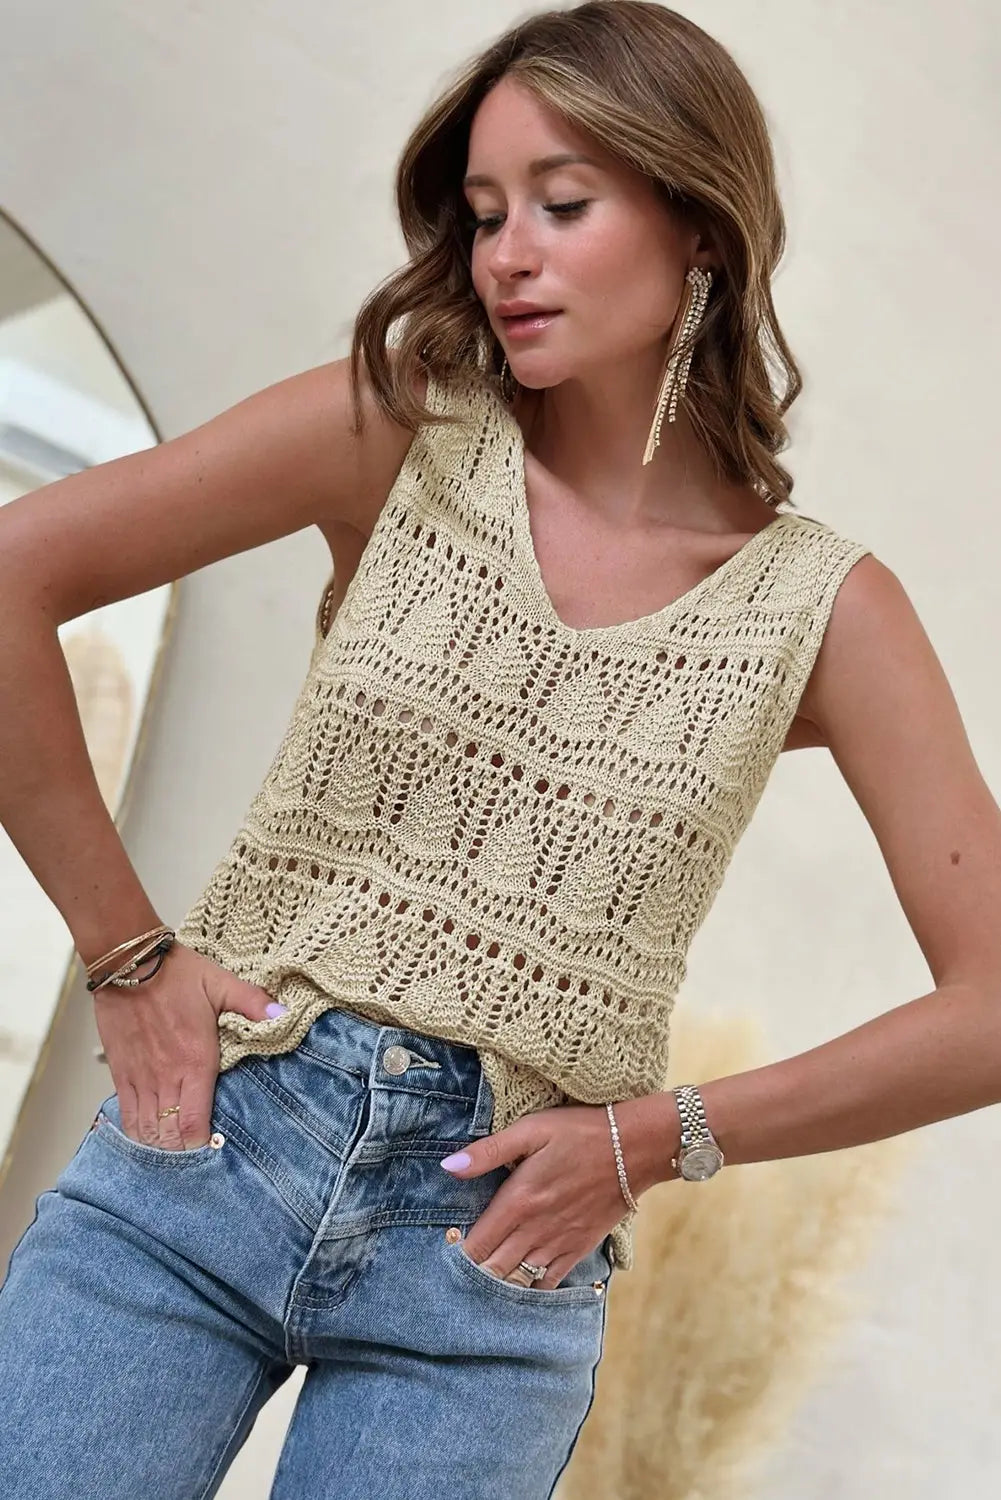 Apricot v neck textured hollow-out sweater vest - tops